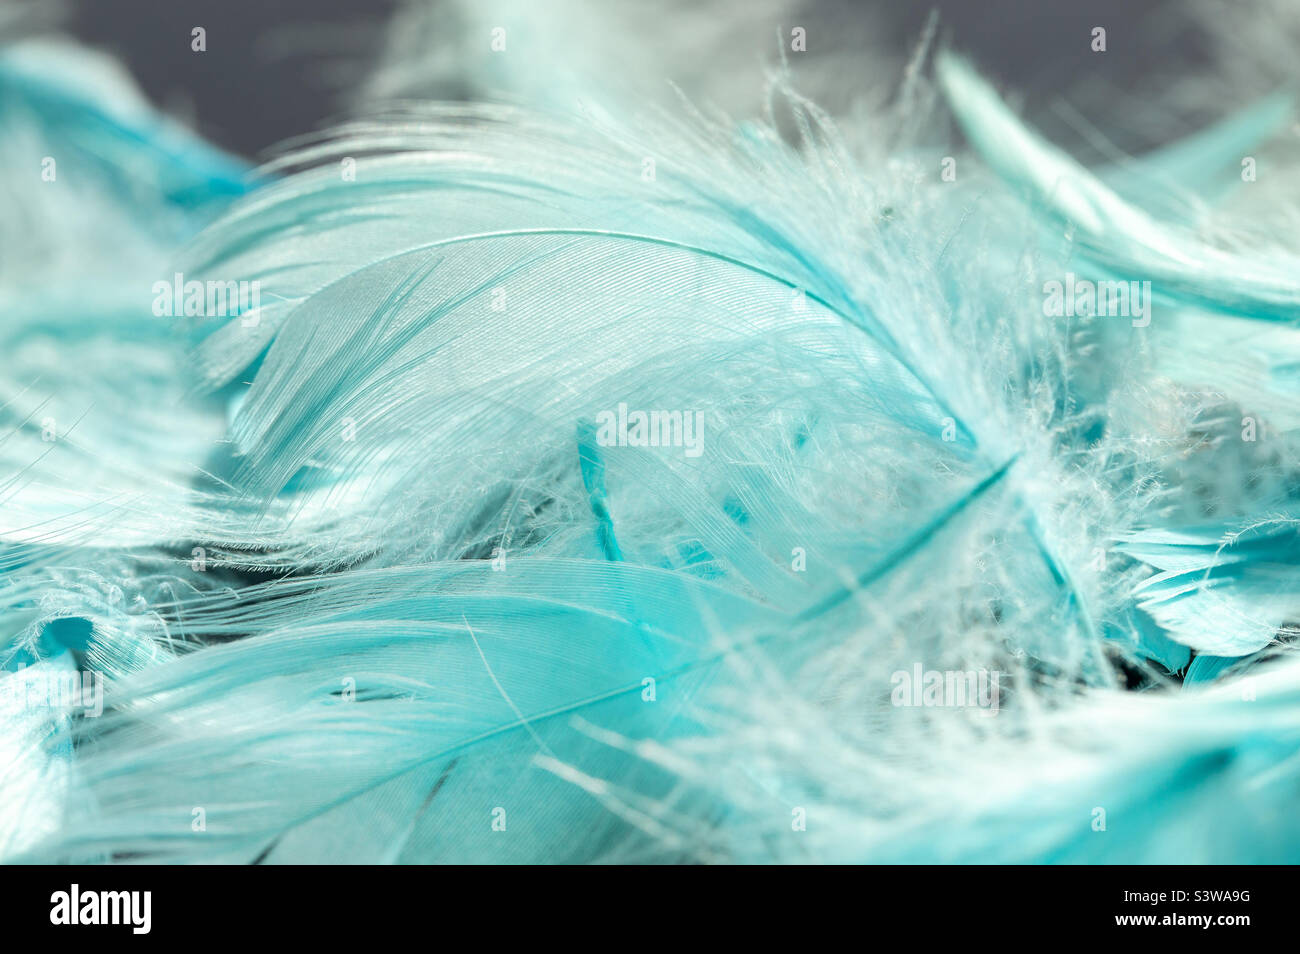 Macro shot of baby blue colored feathers Stock Photo